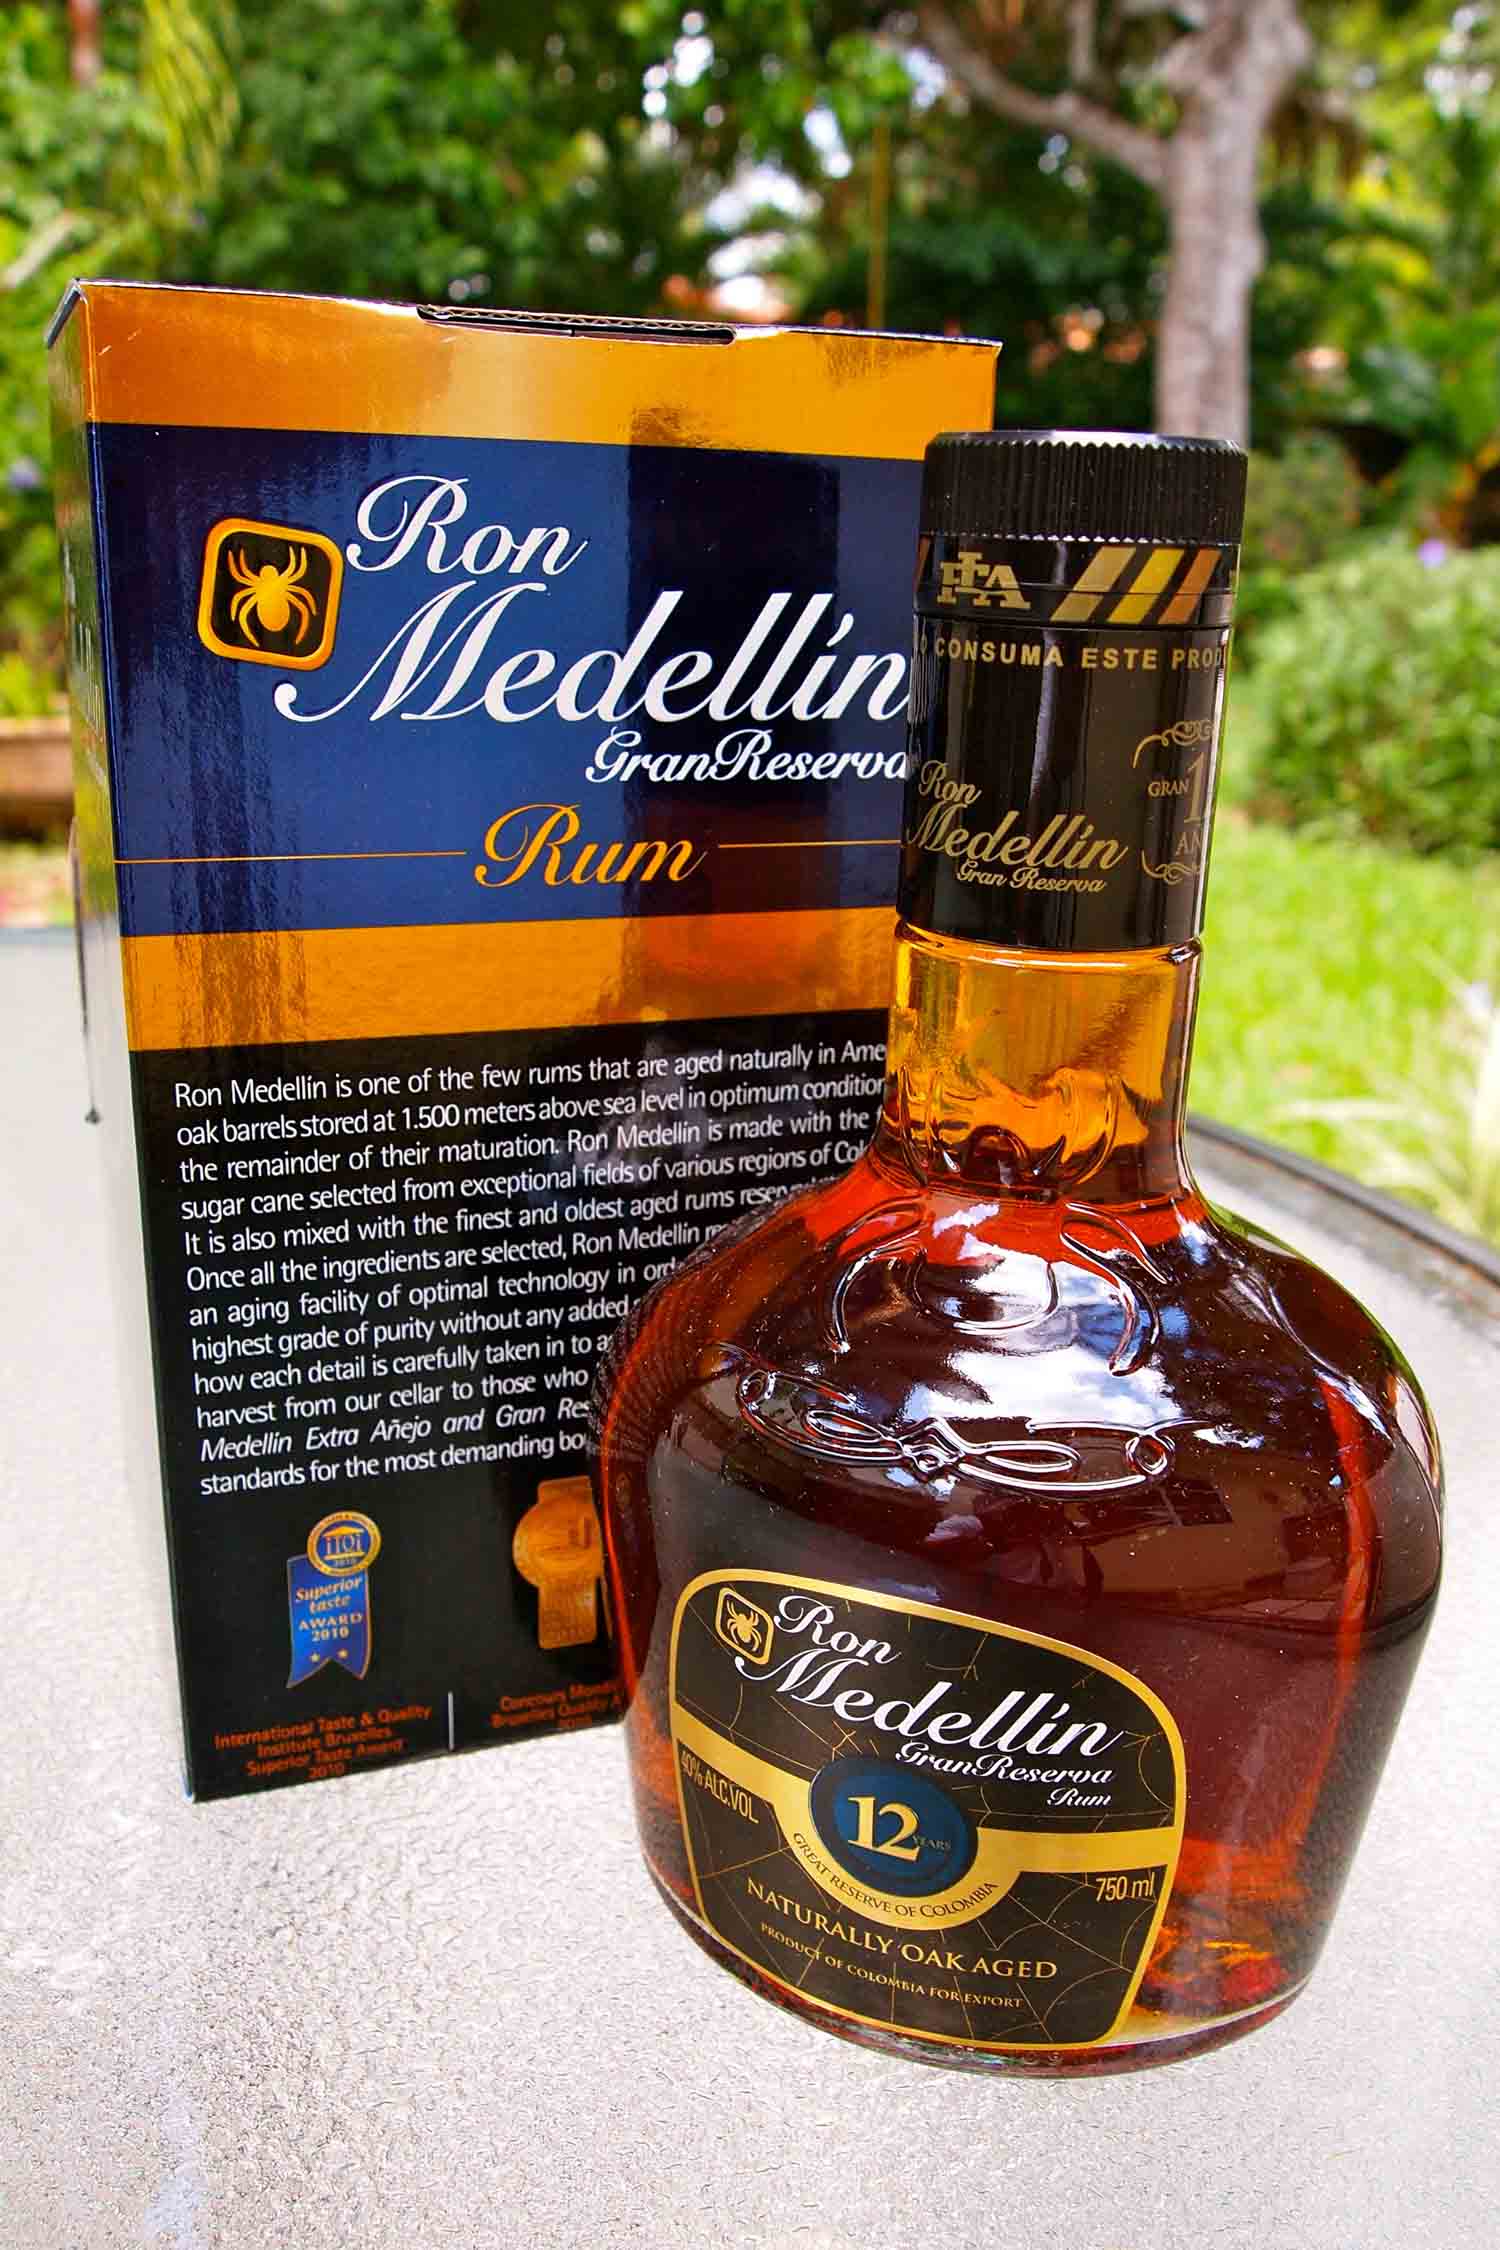 Colombian rum Ron de Medellin one of the most popular drinks in Colombia